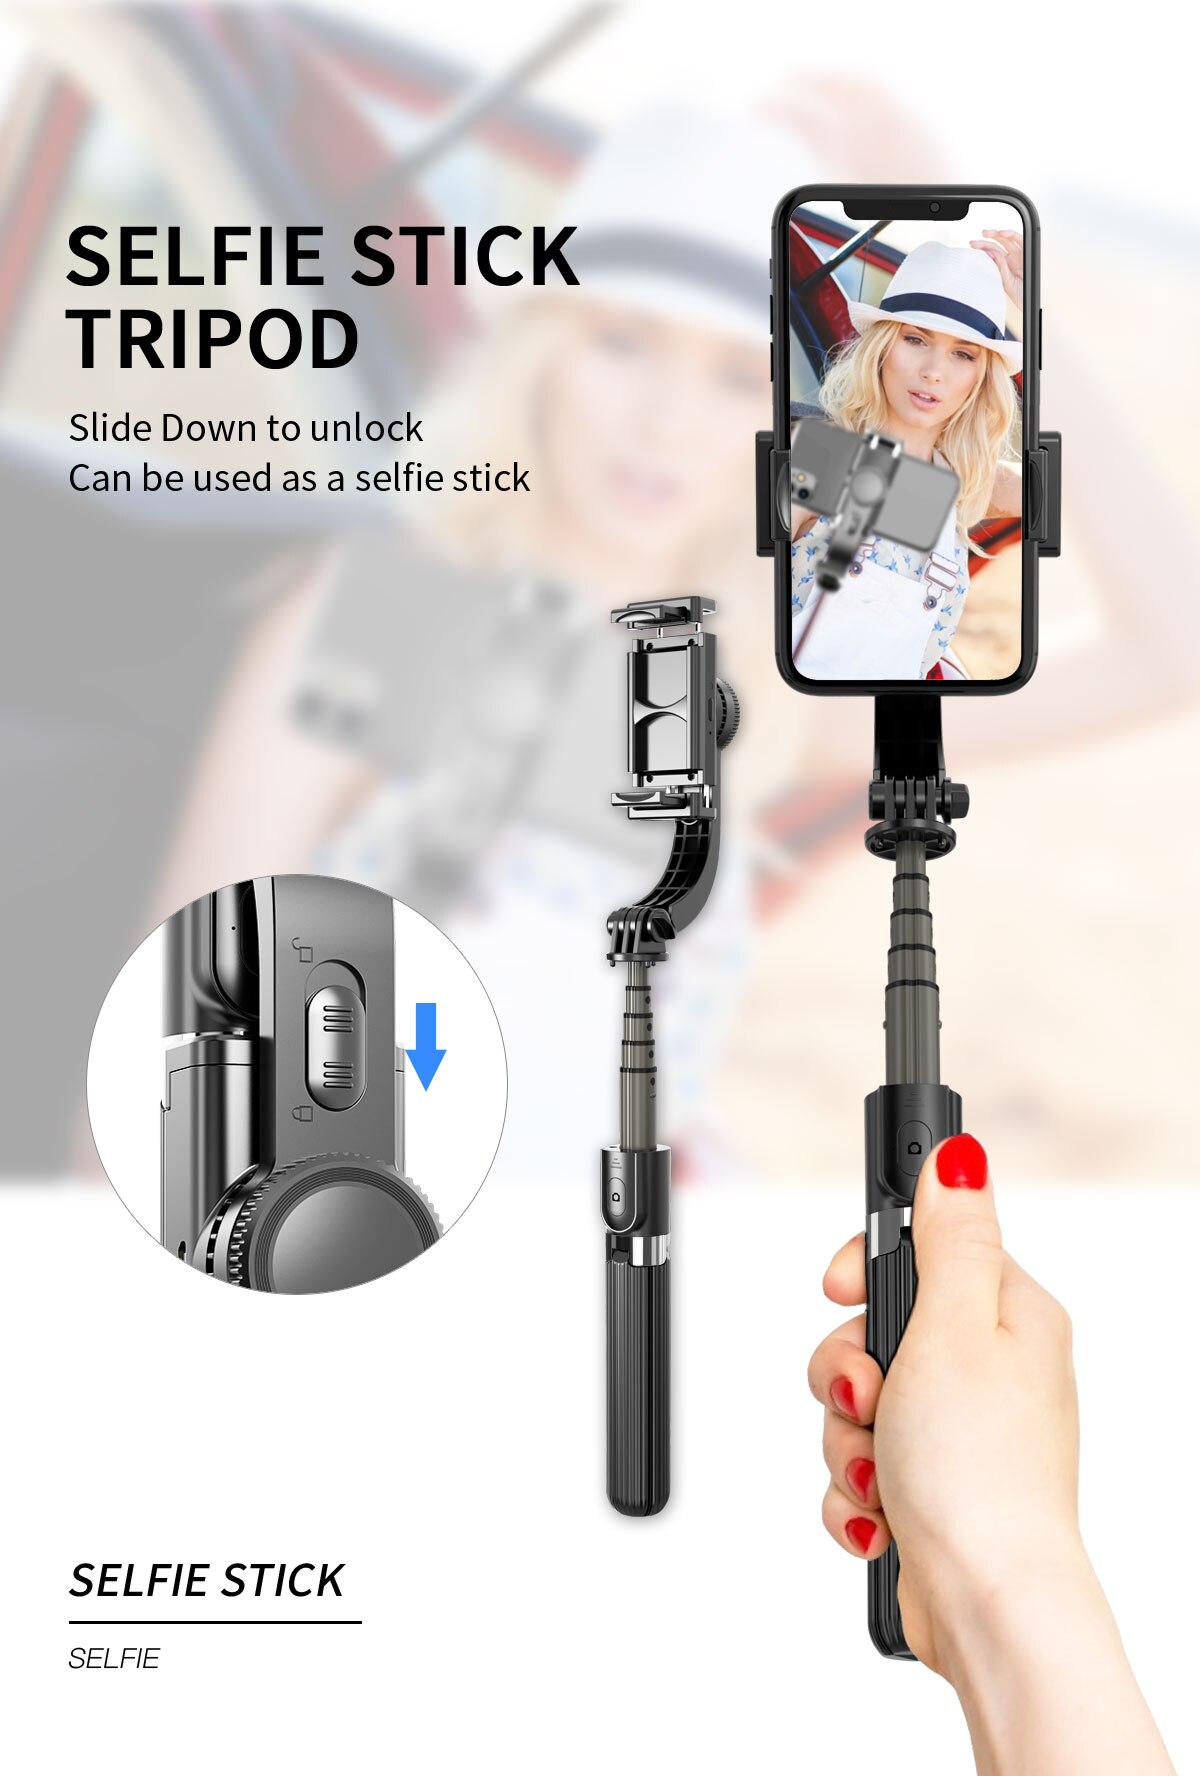 Handheld Gimbal Stabilizers Selfie Stick Tripod Extendable Anti-shake Mobile Phone Stick Tripod Stand With Bluetooth Remote